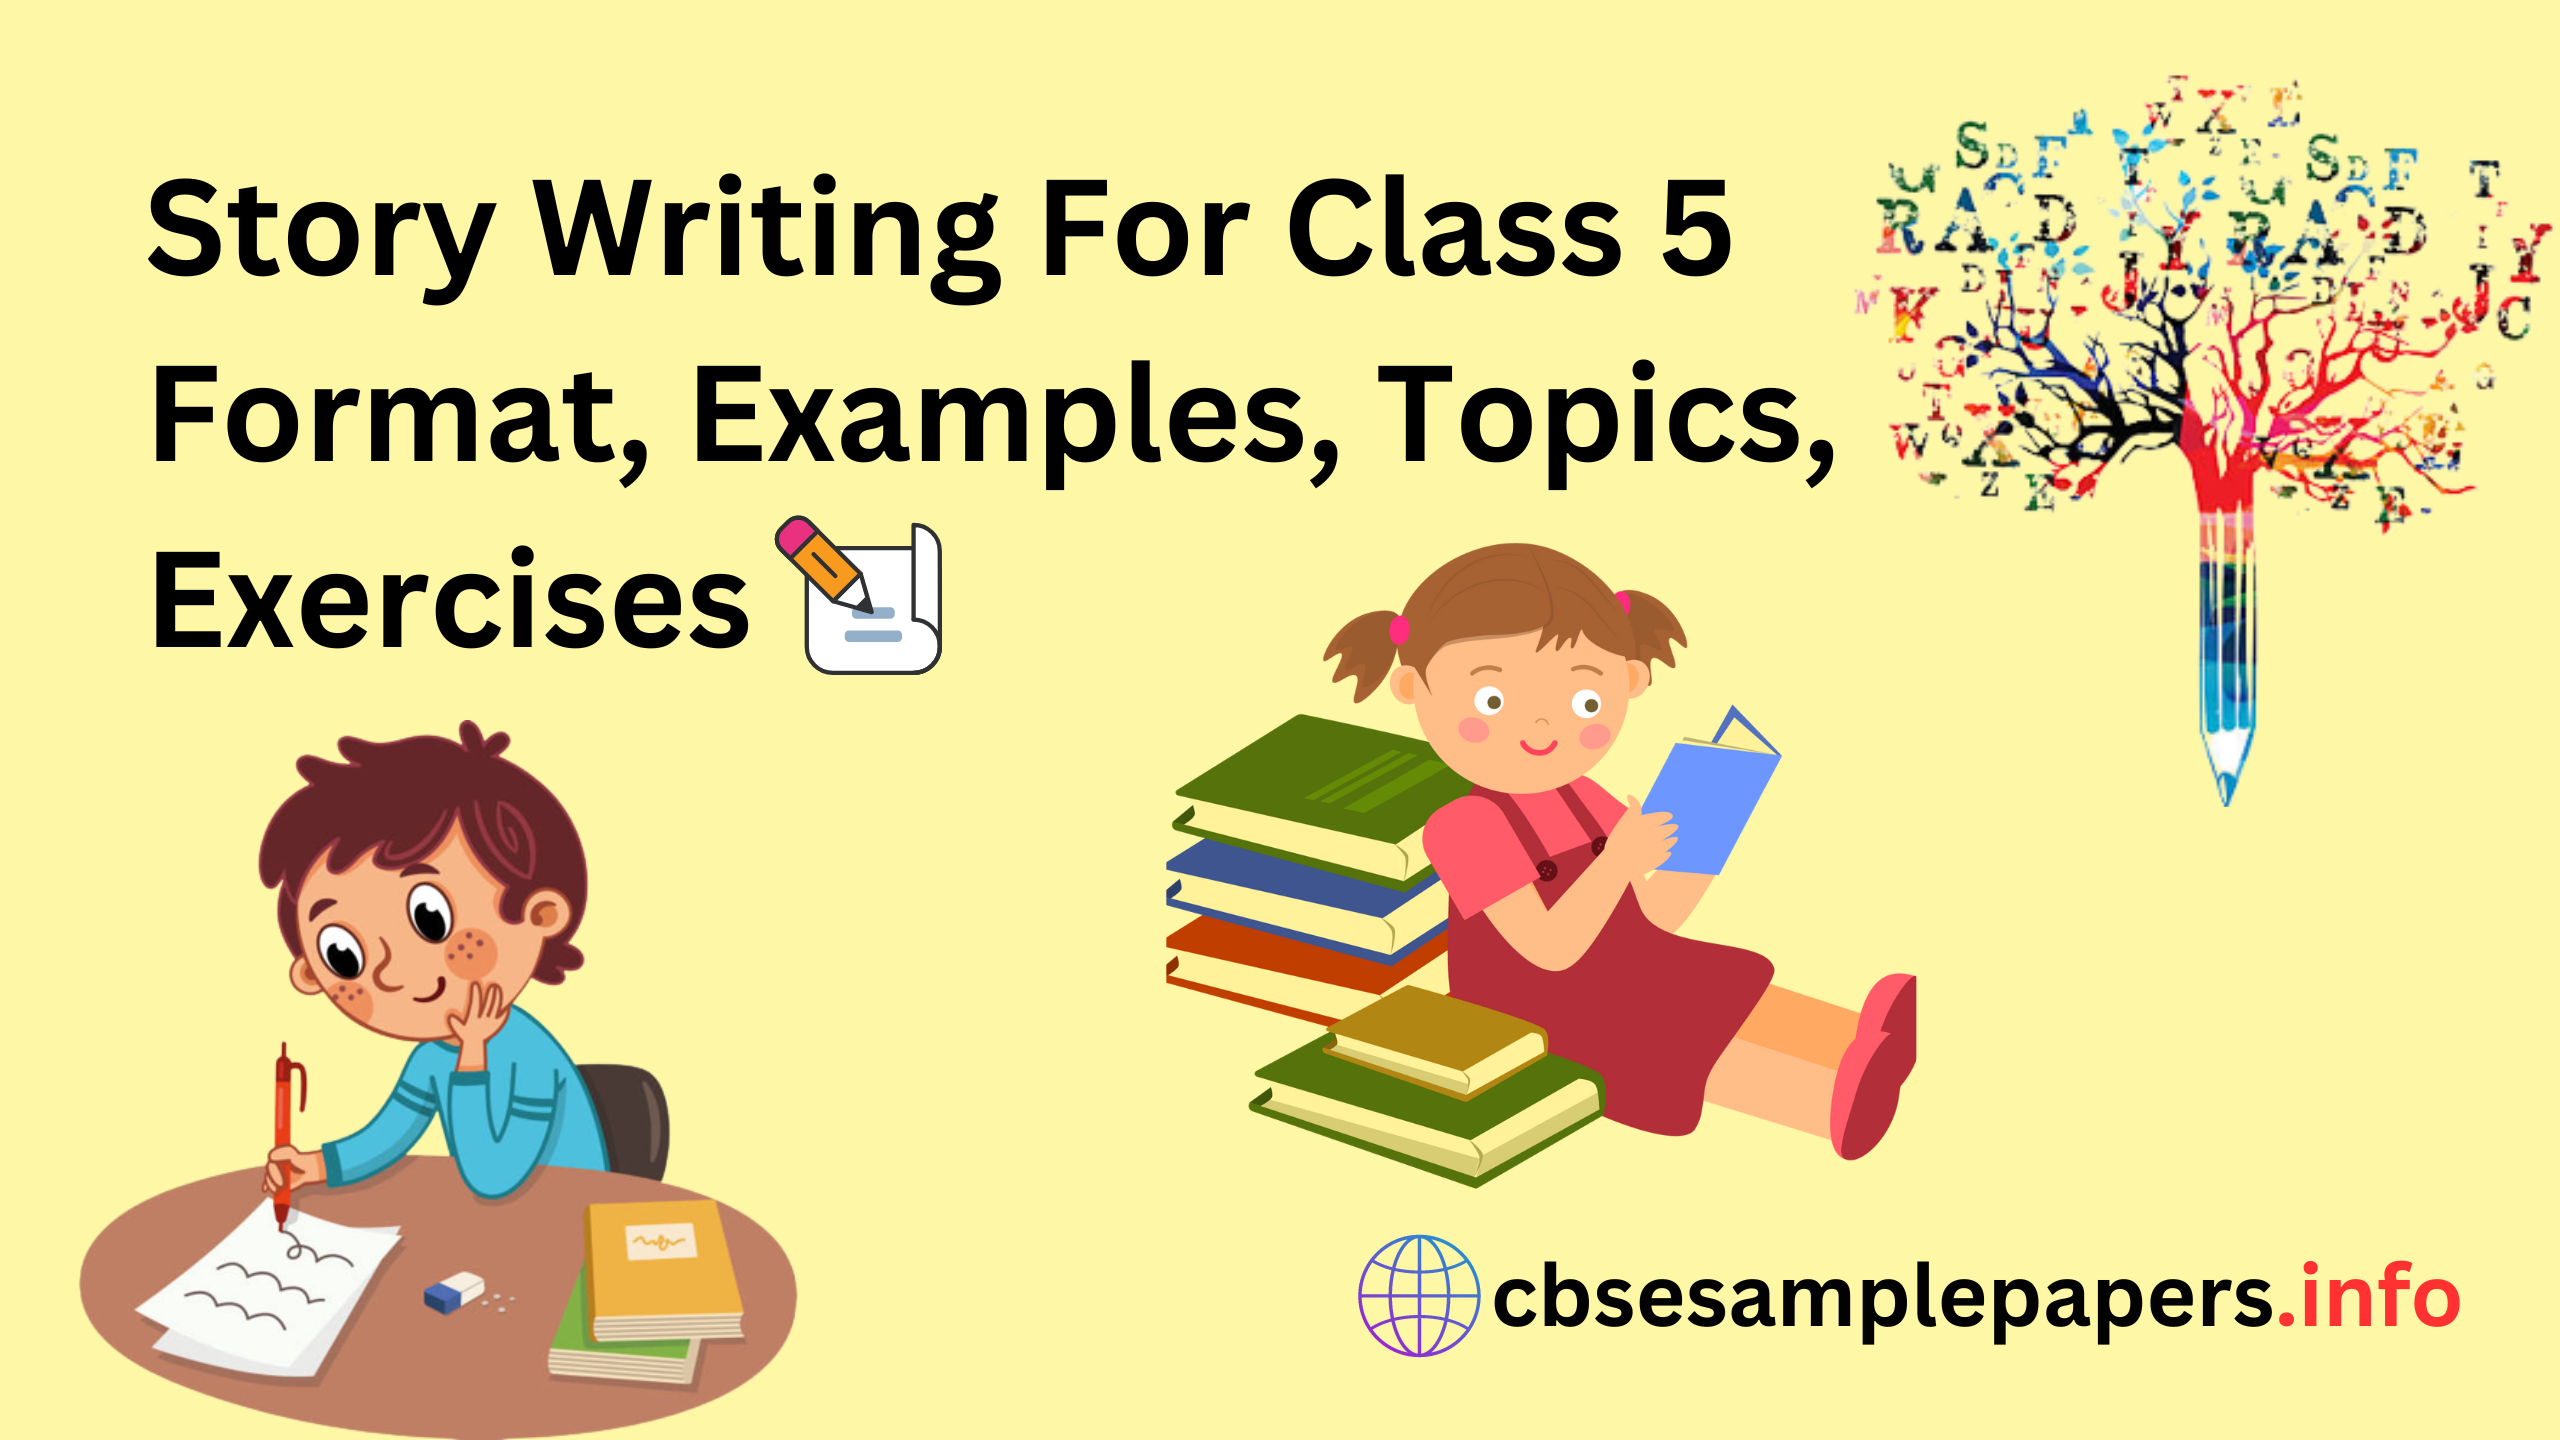 Story Writing For Class 5 Format, Examples, Topics, Exercises - CBSE ...